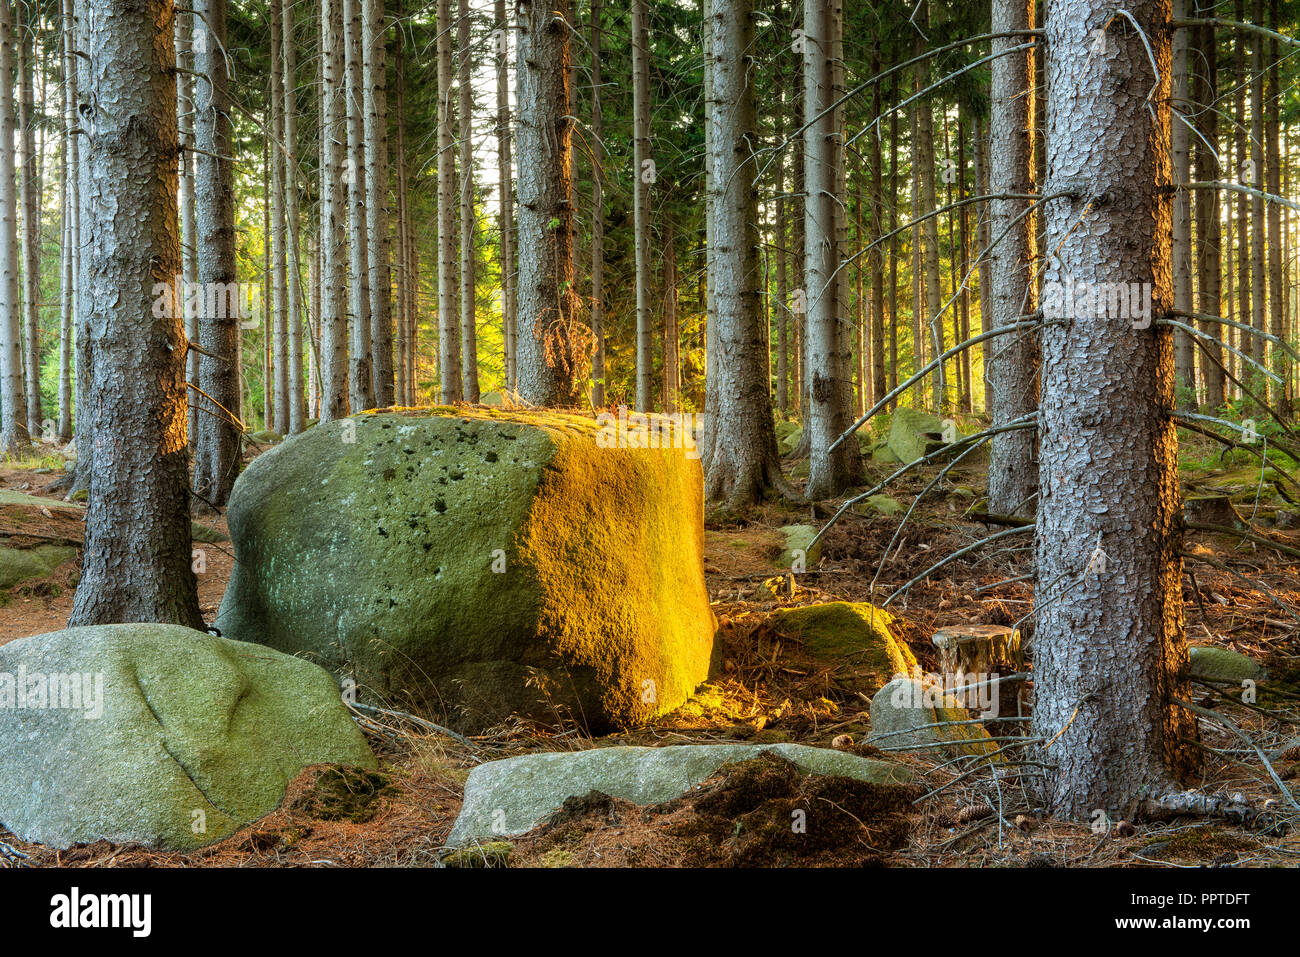 Spruce forest with large boulders in the evening light, near Wernigerode, Harz, Saxony-Anhalt, Germany Stock Photo